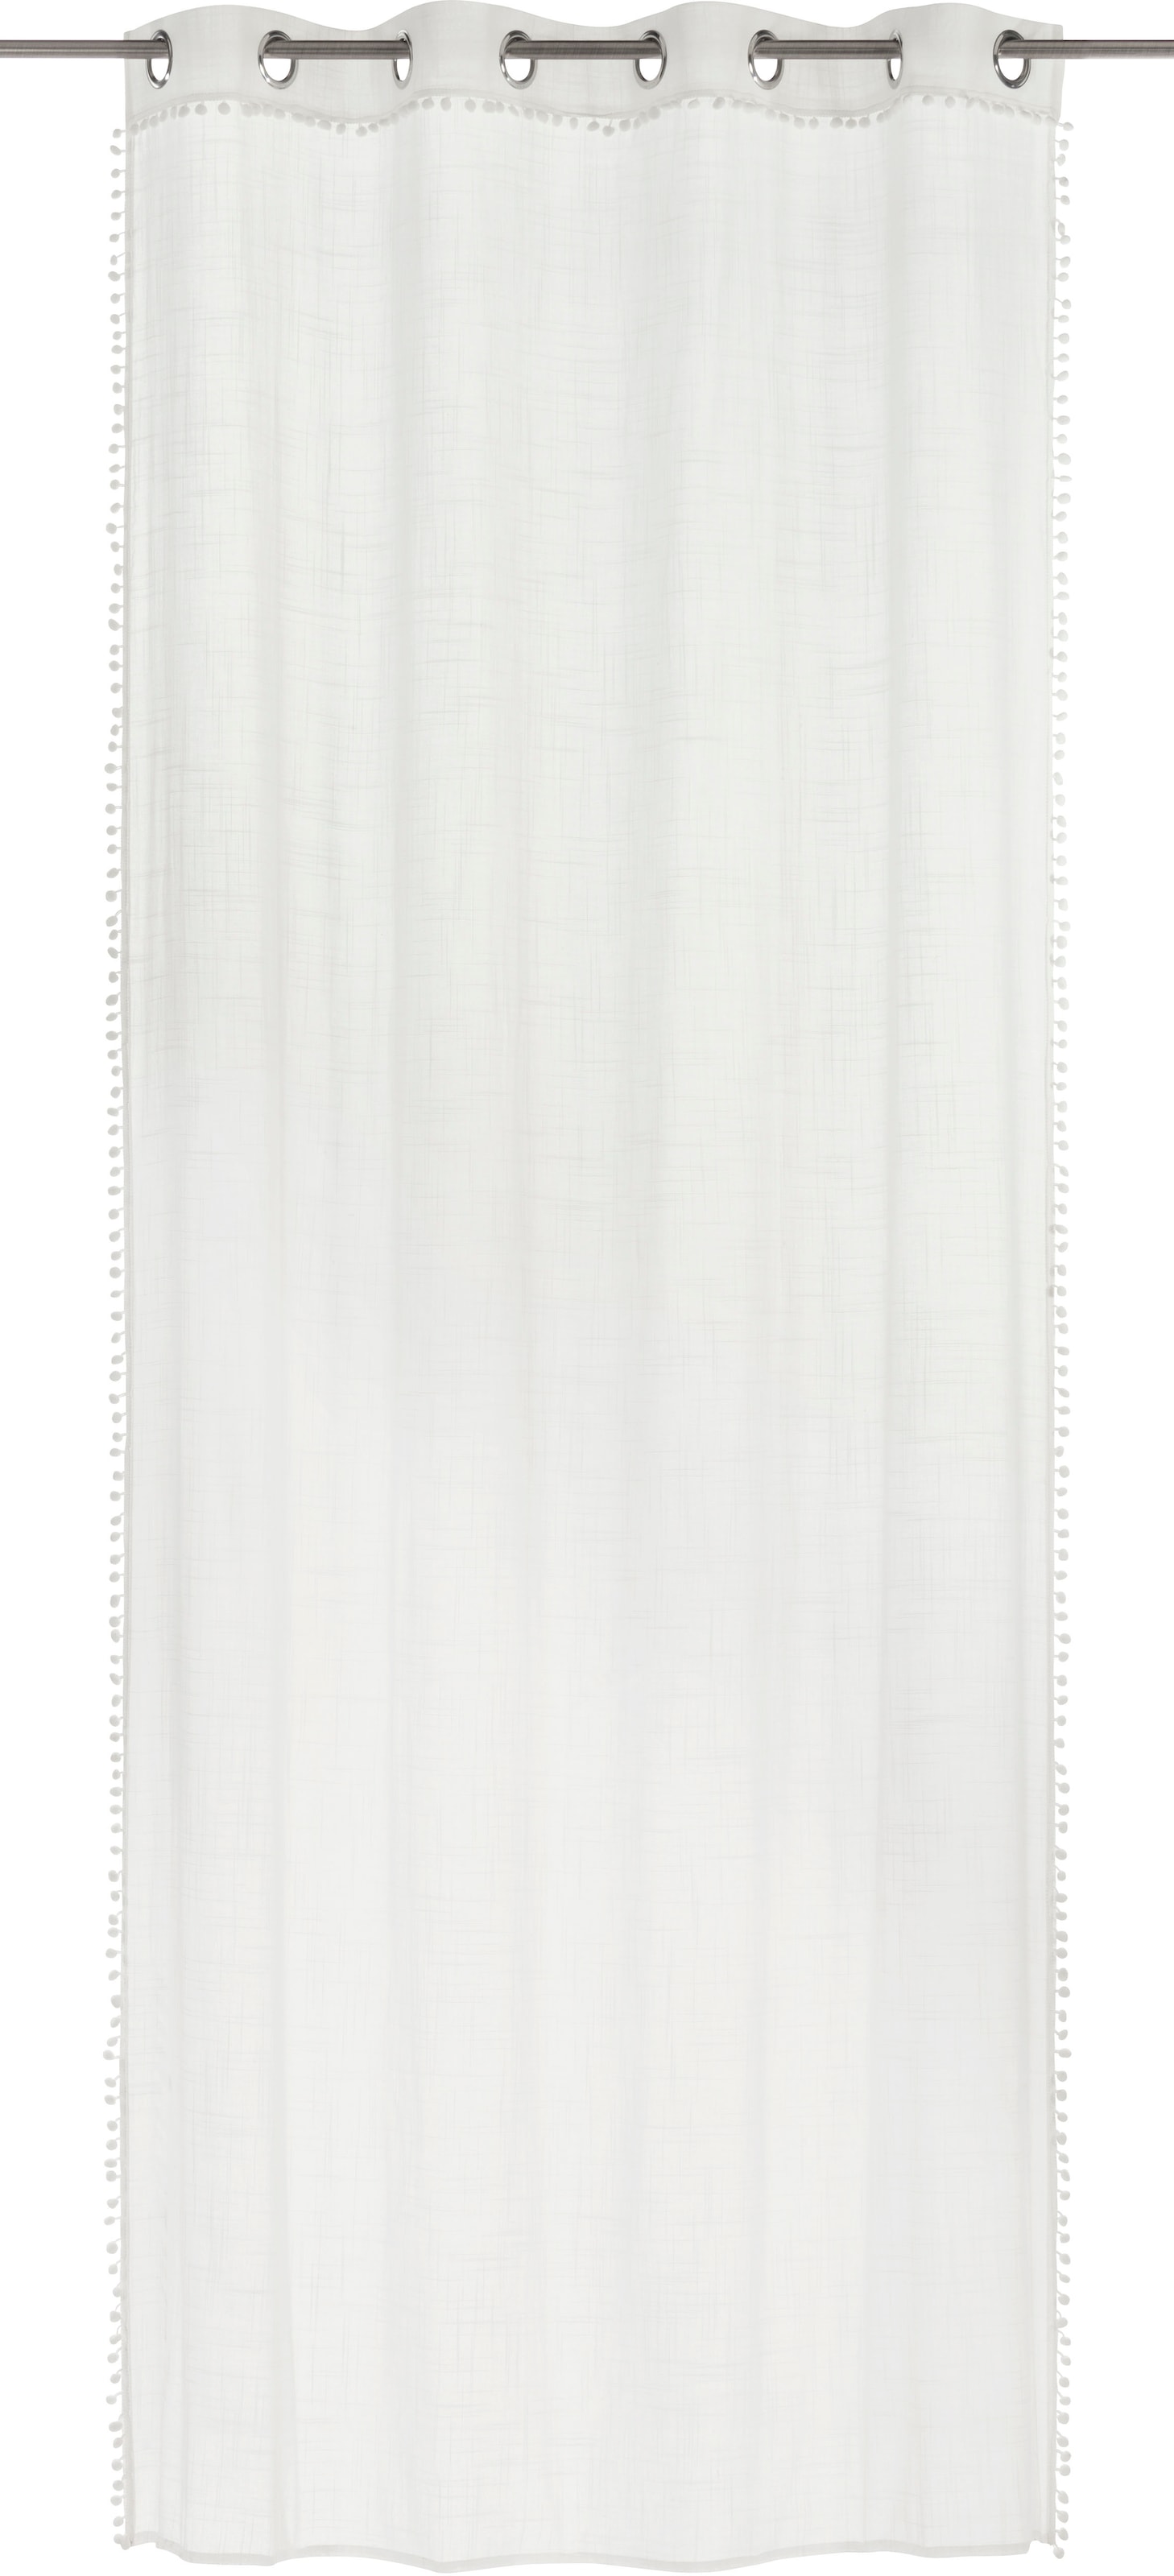 00 Collection »Natural Charme Gardine OTTO freundin (1 Home St.) offwhite«, bei